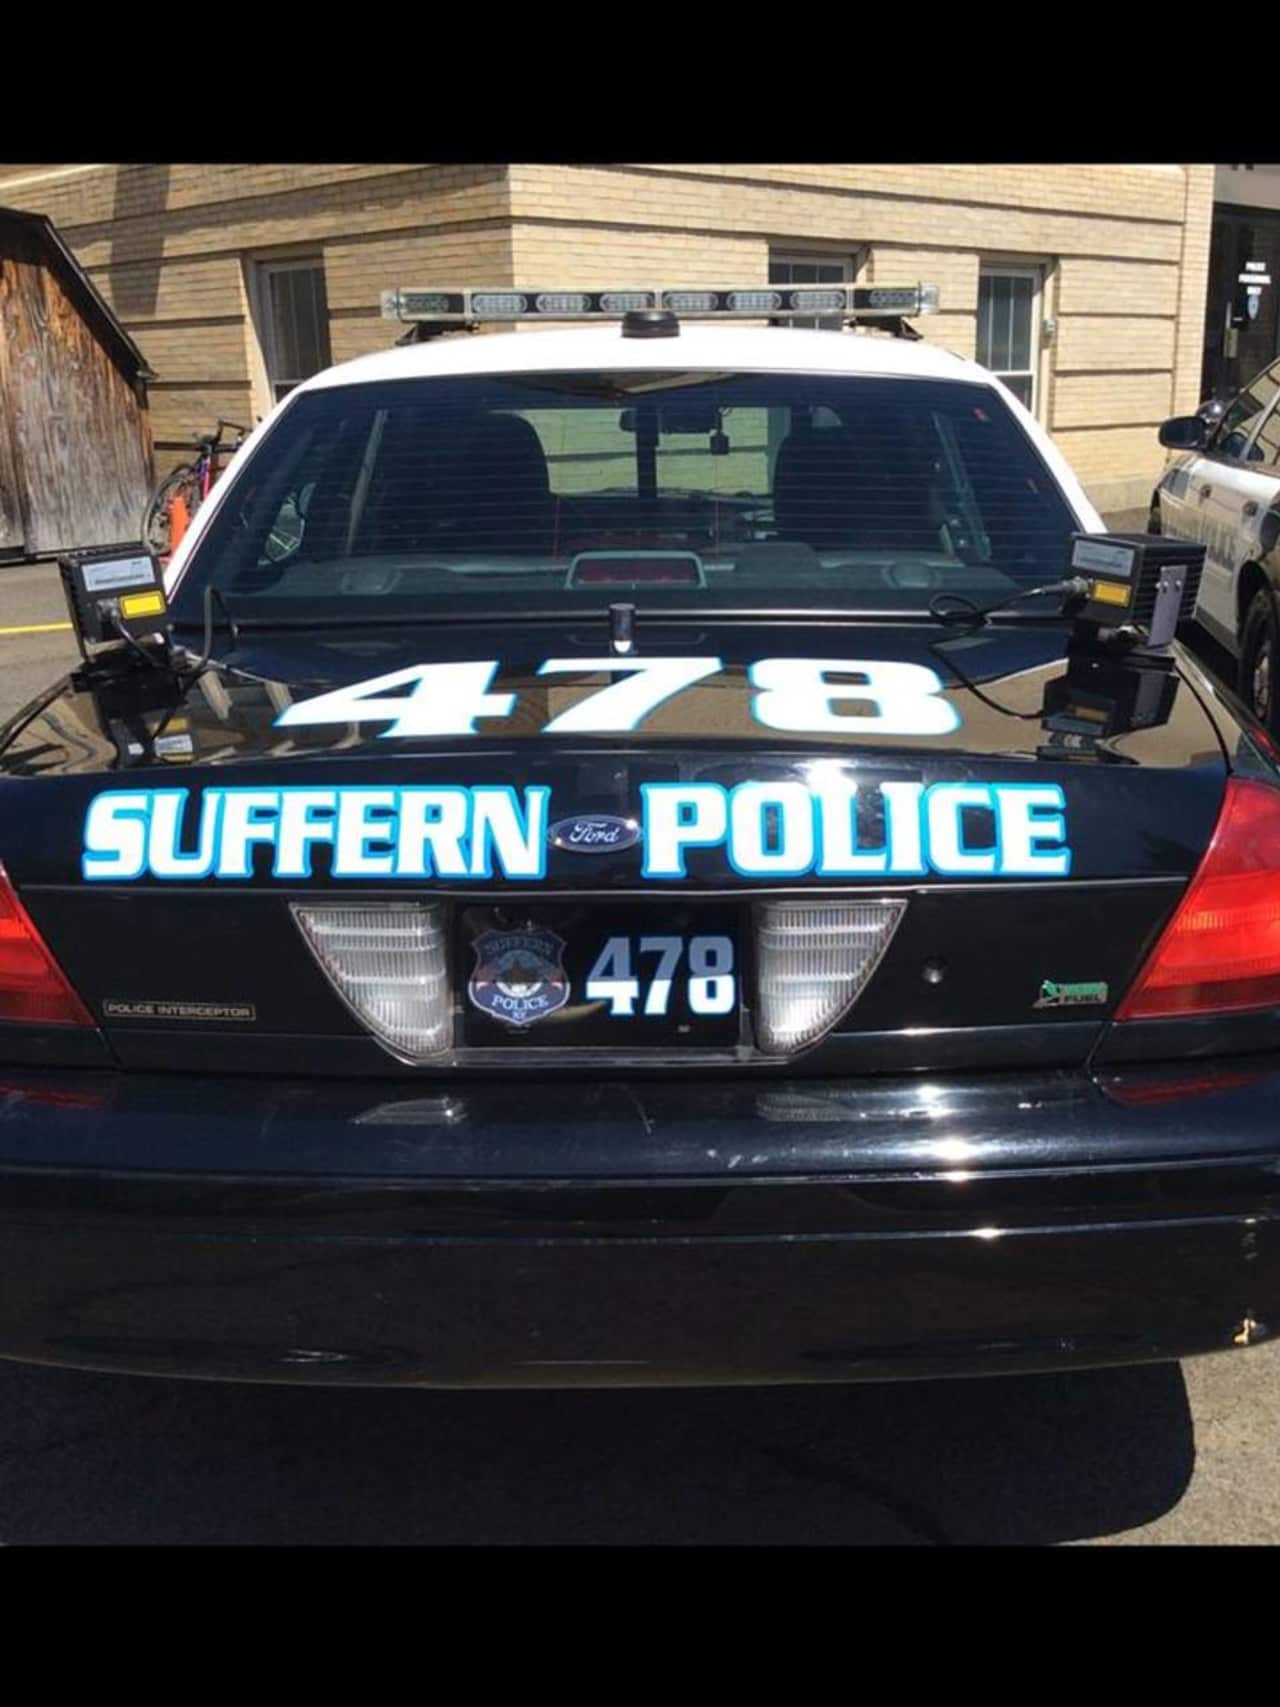 The Suffern Police Department found unsafe conditions at a Center Street rental property on Friday.